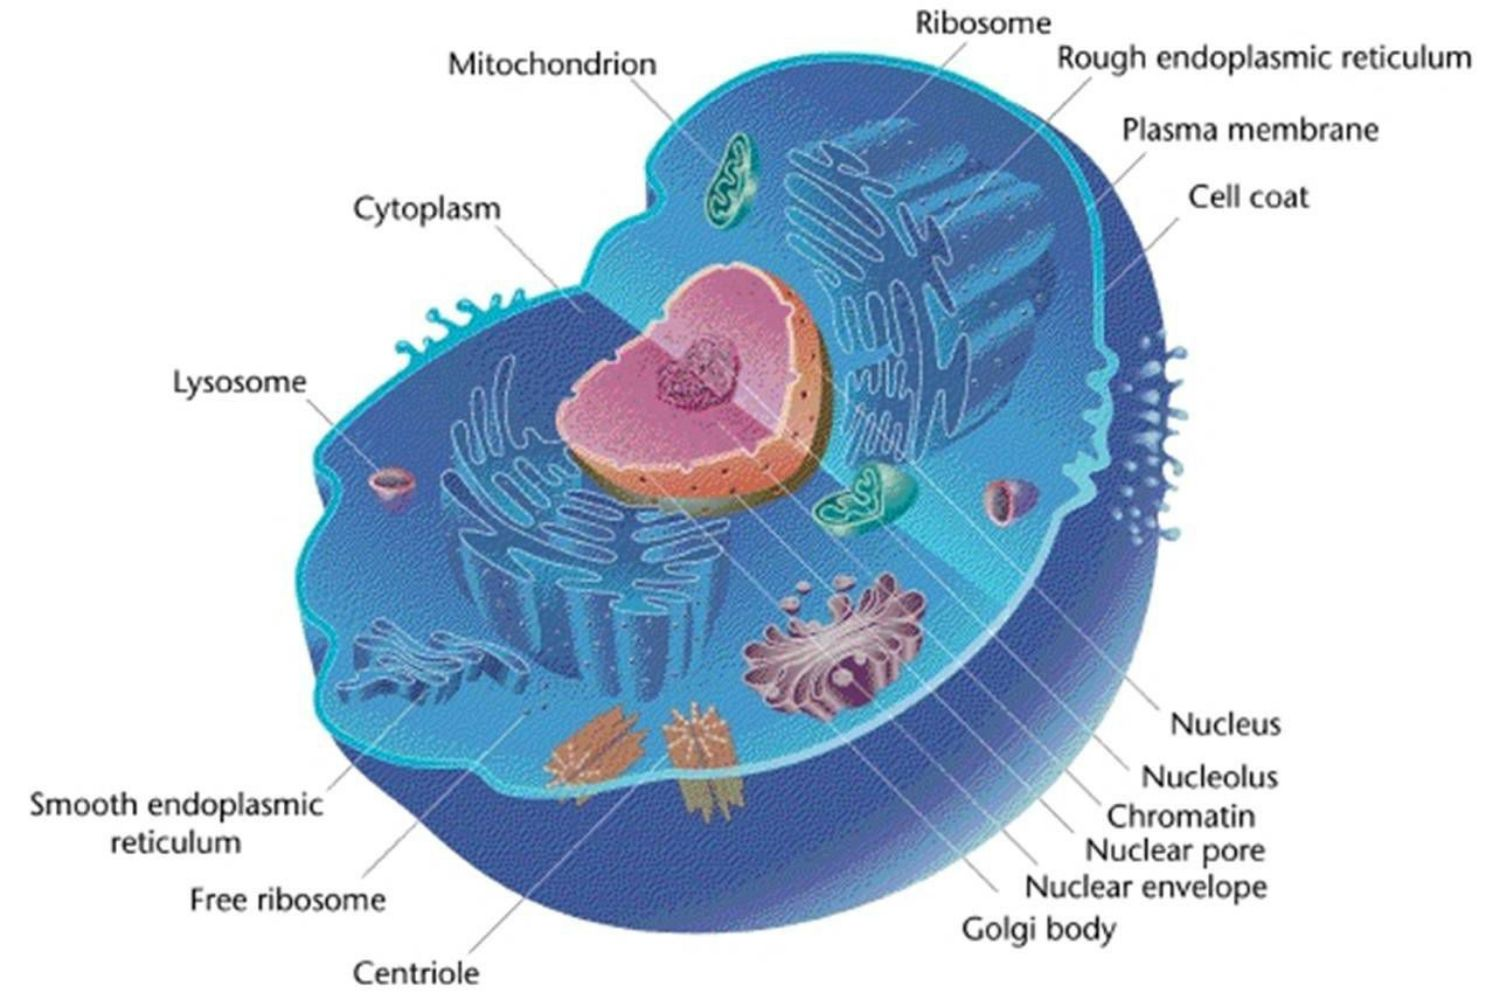 Animal cell with nucleus